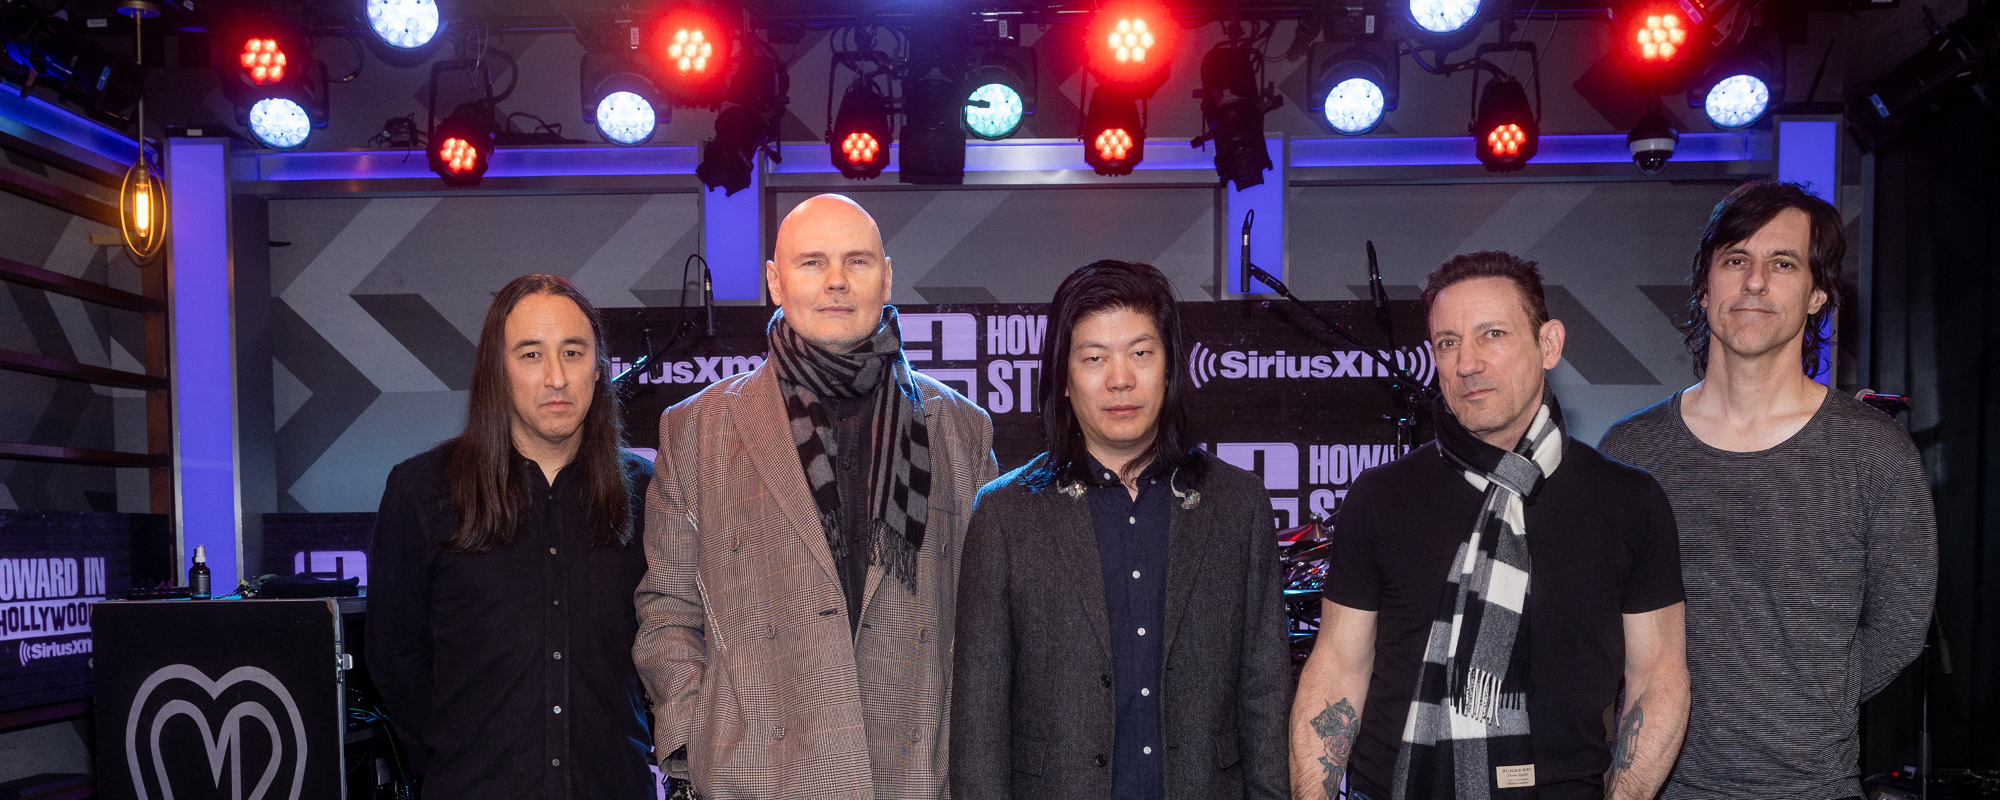 The Smashing Pumpkins Need a New Guitarist—and Applications Are Open to Anyone